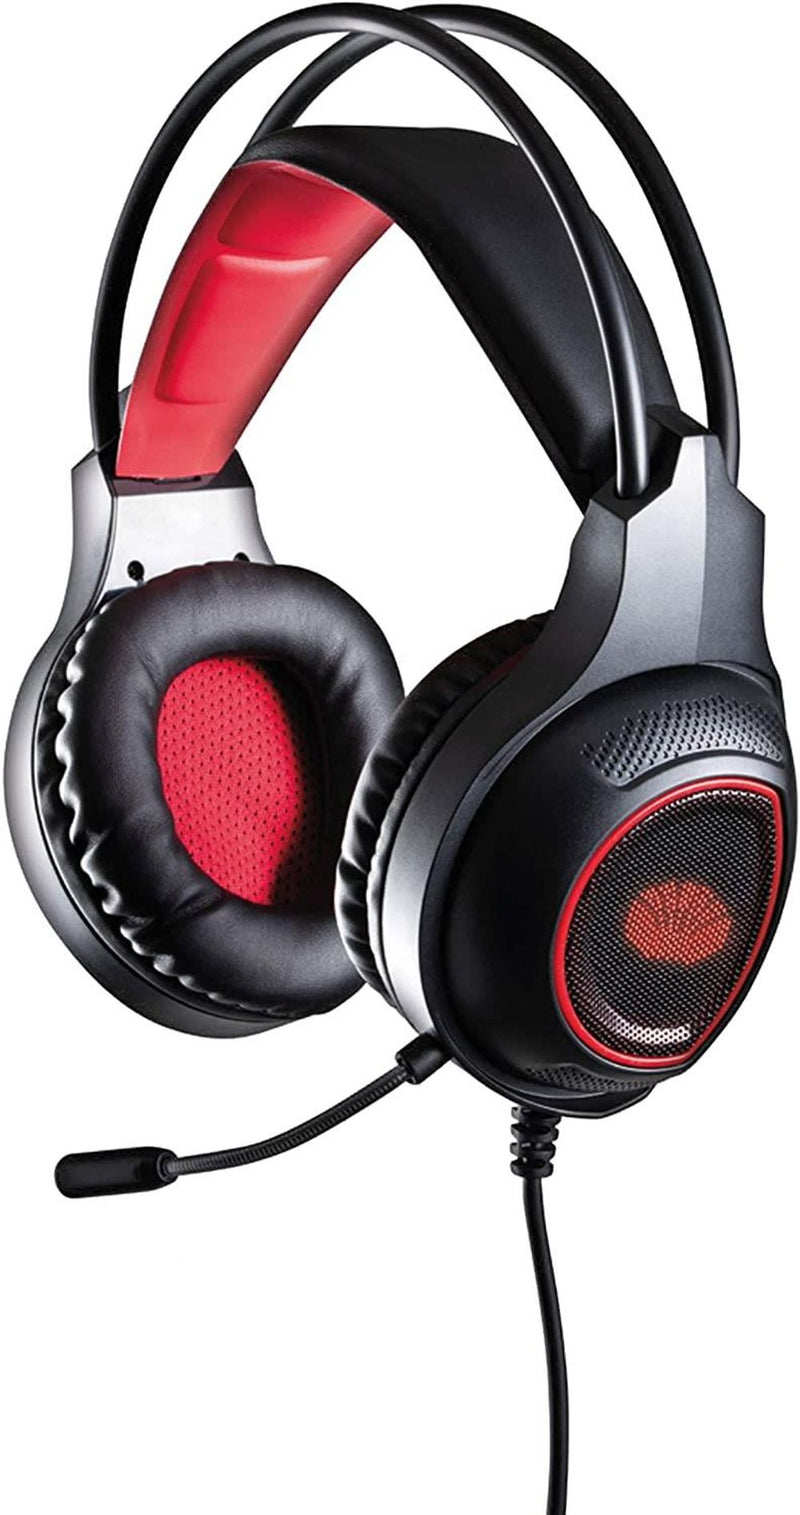 Daewoo Universal Gaming Headset with Flexible Microphone  Scroll Volume Control, Wired Input 3.5mm Interface Devices 2m Cable